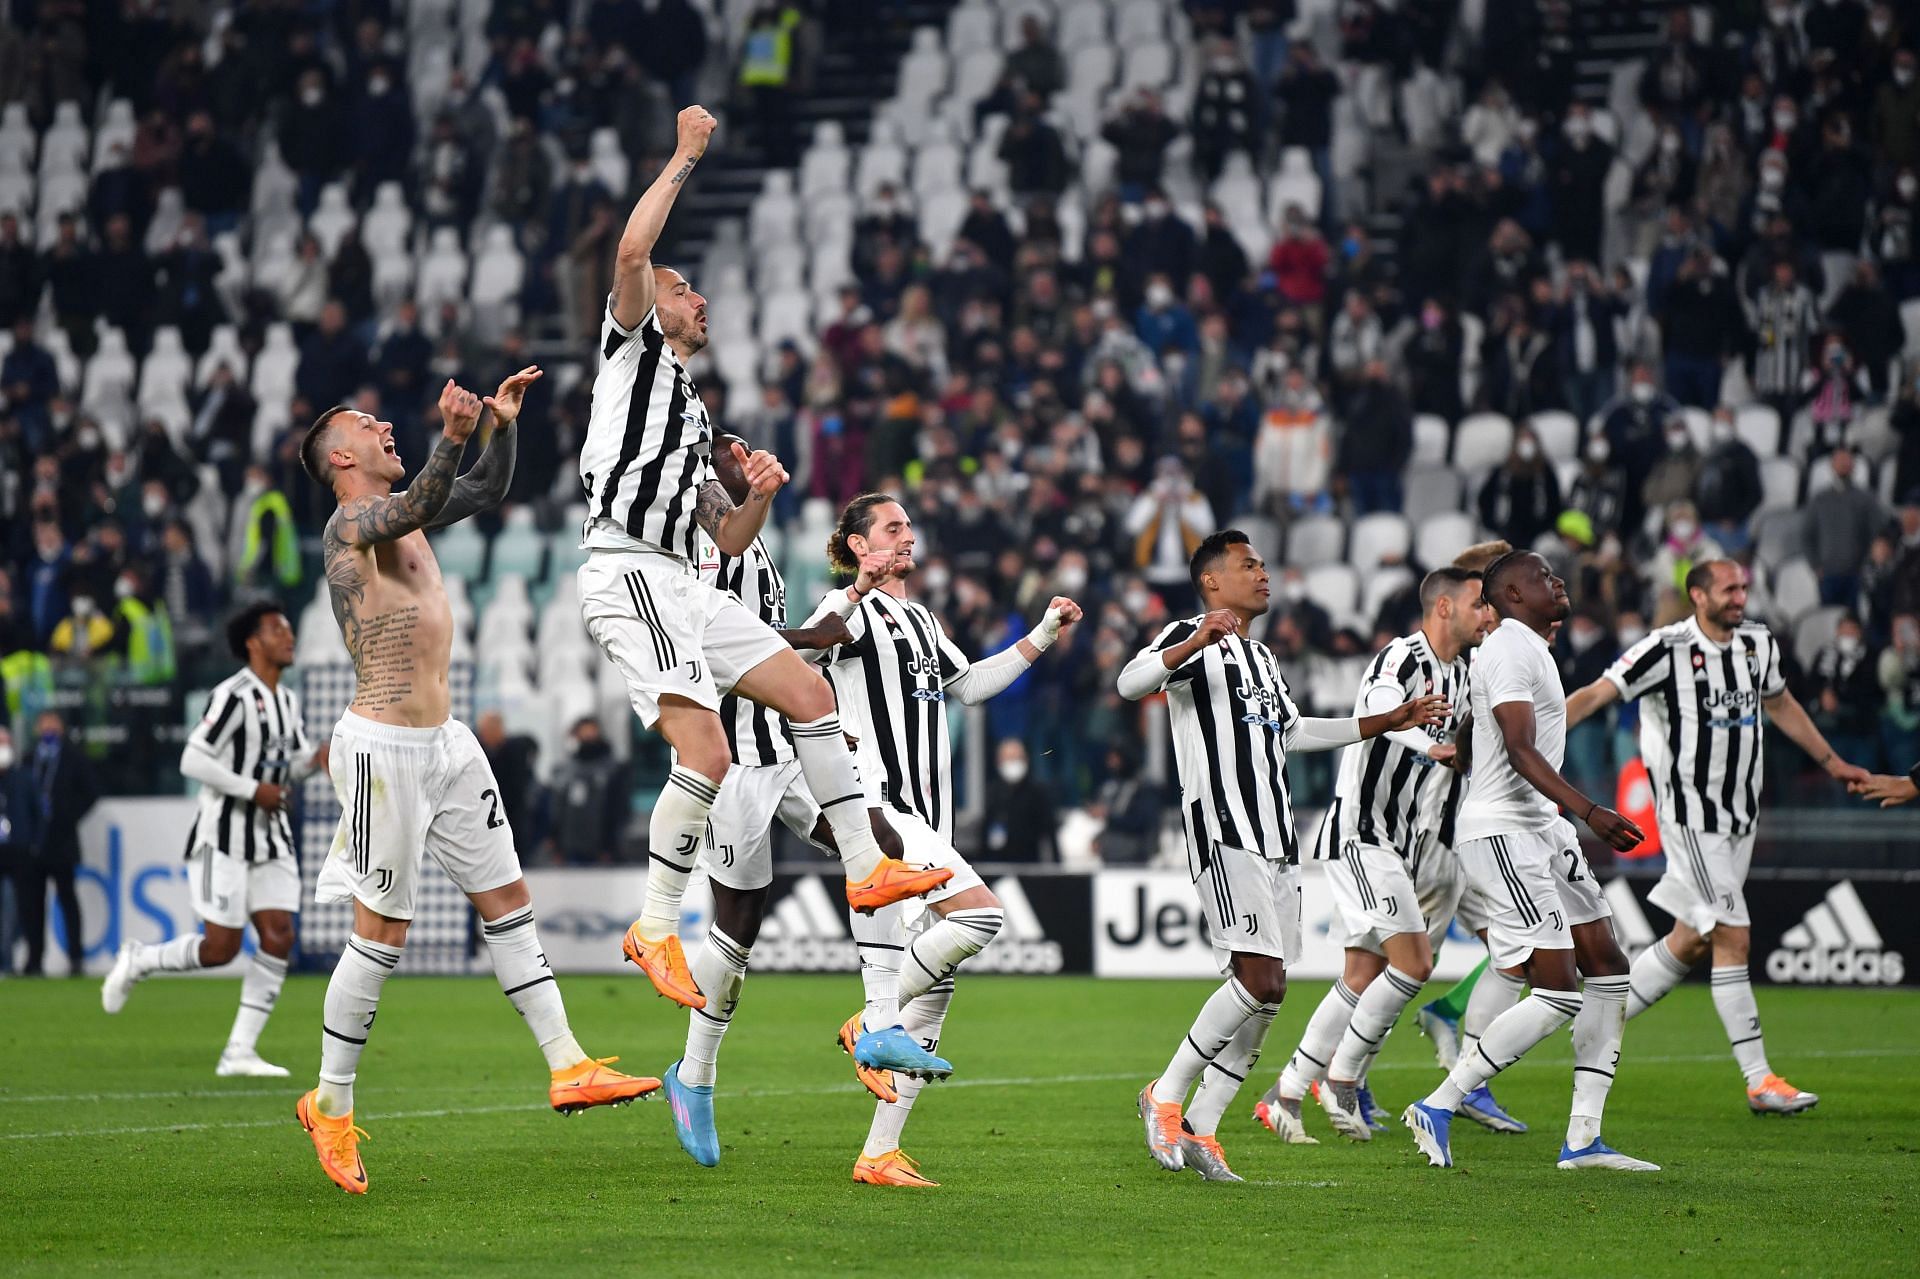 Juventus play Sassuolo on Monday in Serie A